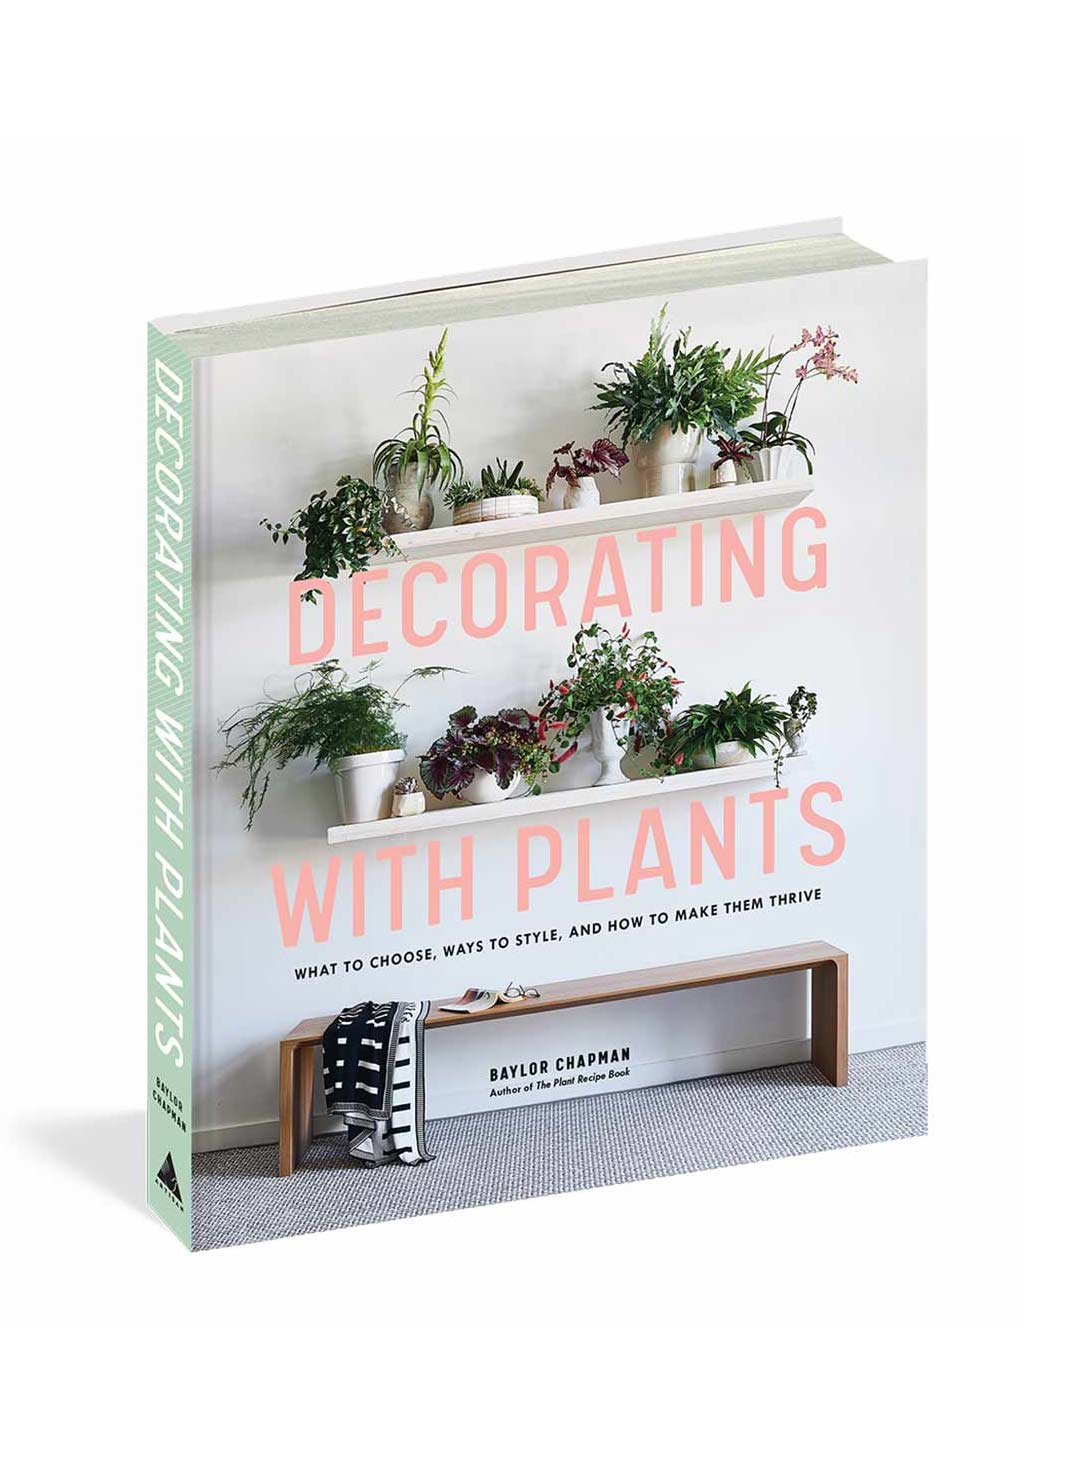 Decorating with Plants - What to Choose, Ways to Style, and How to Make Them Thrive